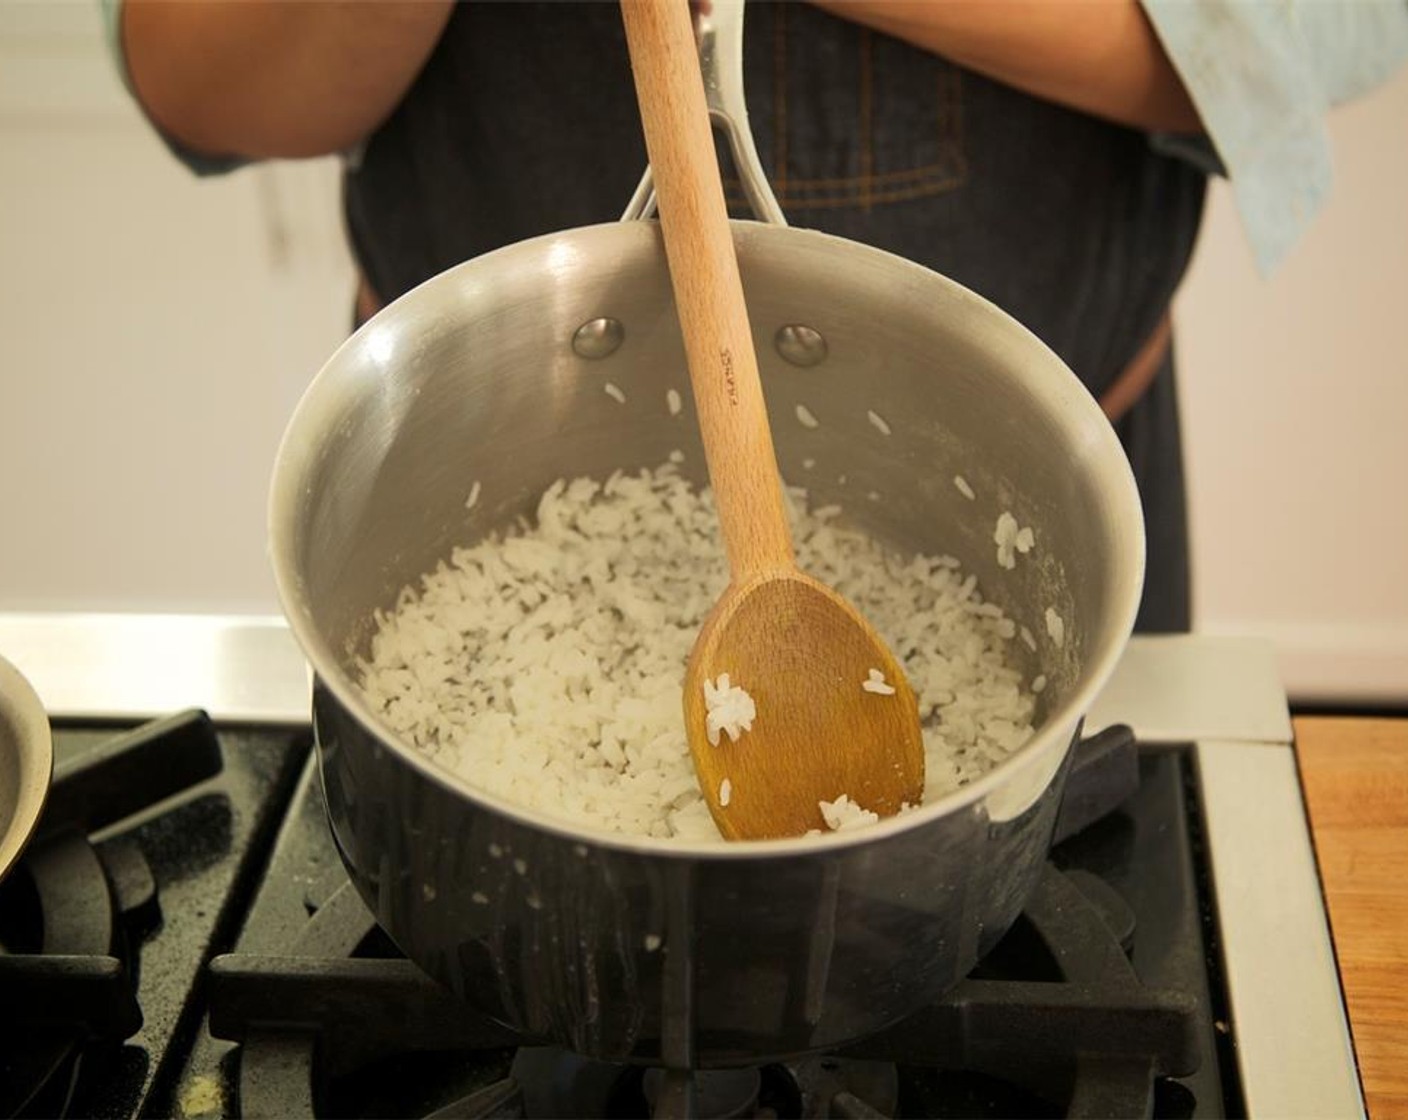 step 4 In a small saucepan, combine one cup of cold water with Glutinous Rice (1/2 cup) and stir. Bring to a boil over high heat, stir again and cover. Reduce heat to medium low, and simmer gently for 20 minutes. Do not stir. Remove from heat, fluff rice and set aside.